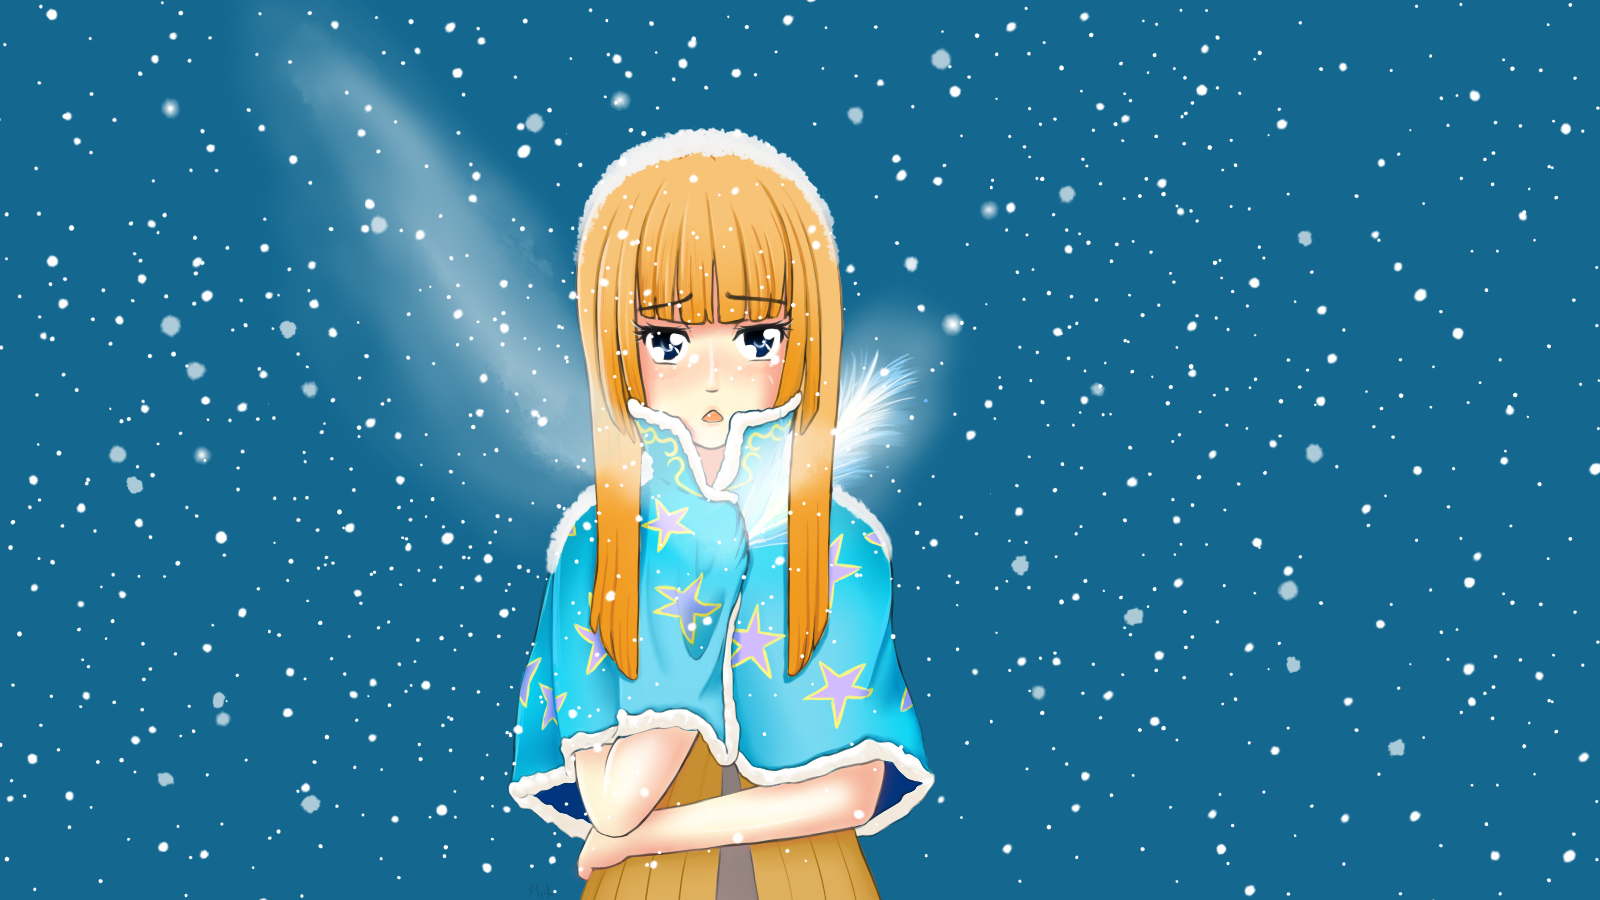 Tried for you for the new year) - My, Anime, Art, Fan art, Winter, New Year